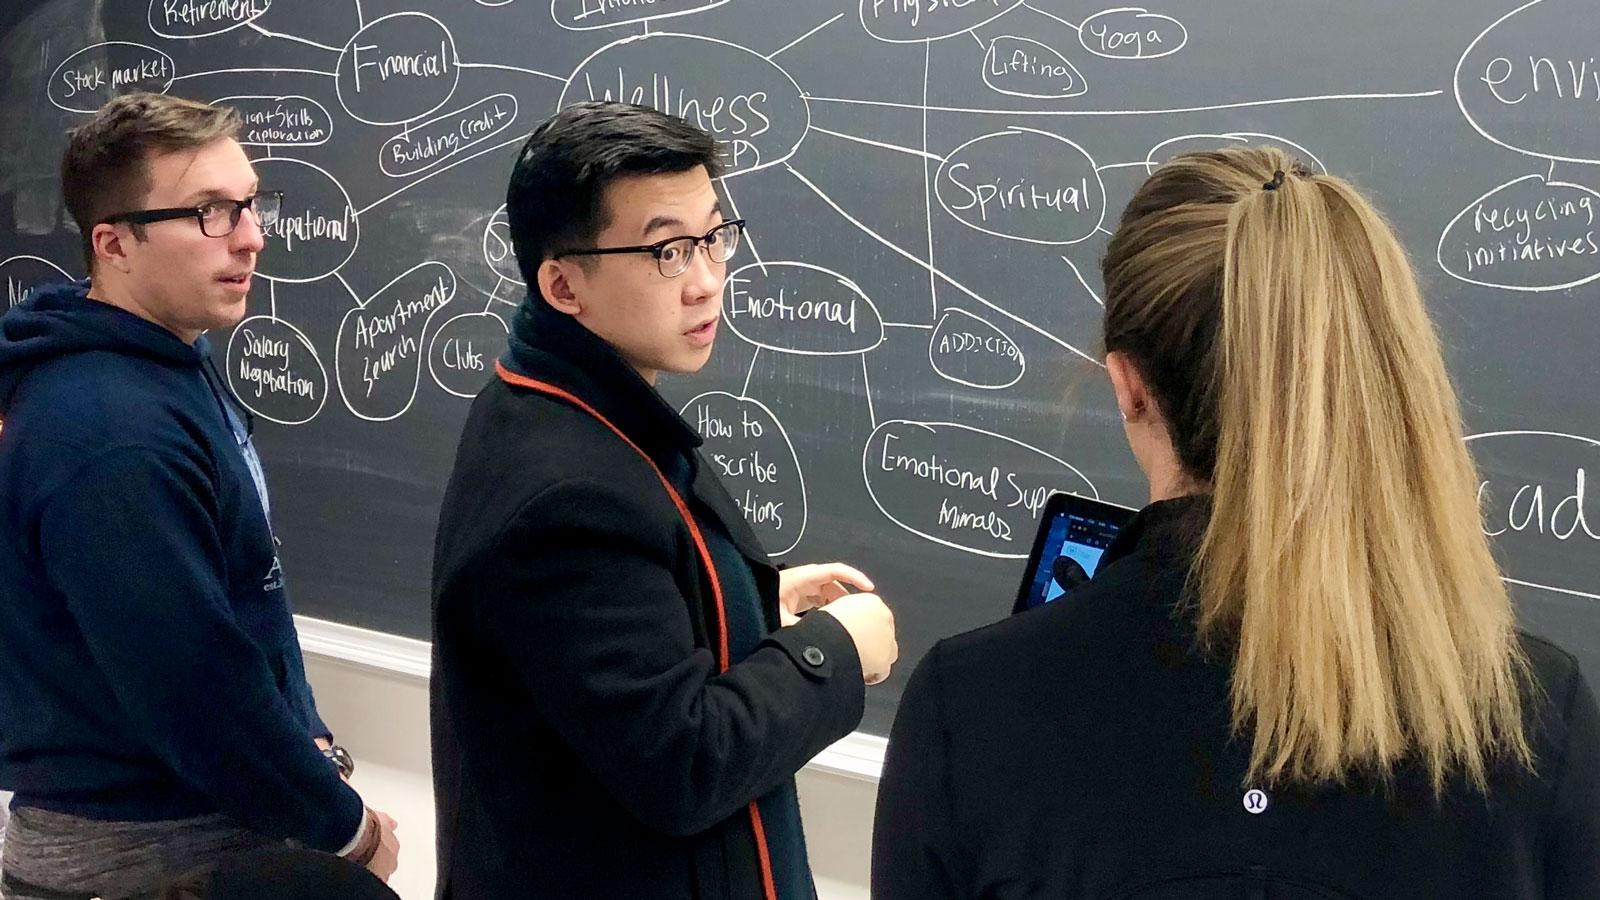 Three students collaborating in front of a chalkboard with a mind map on it.